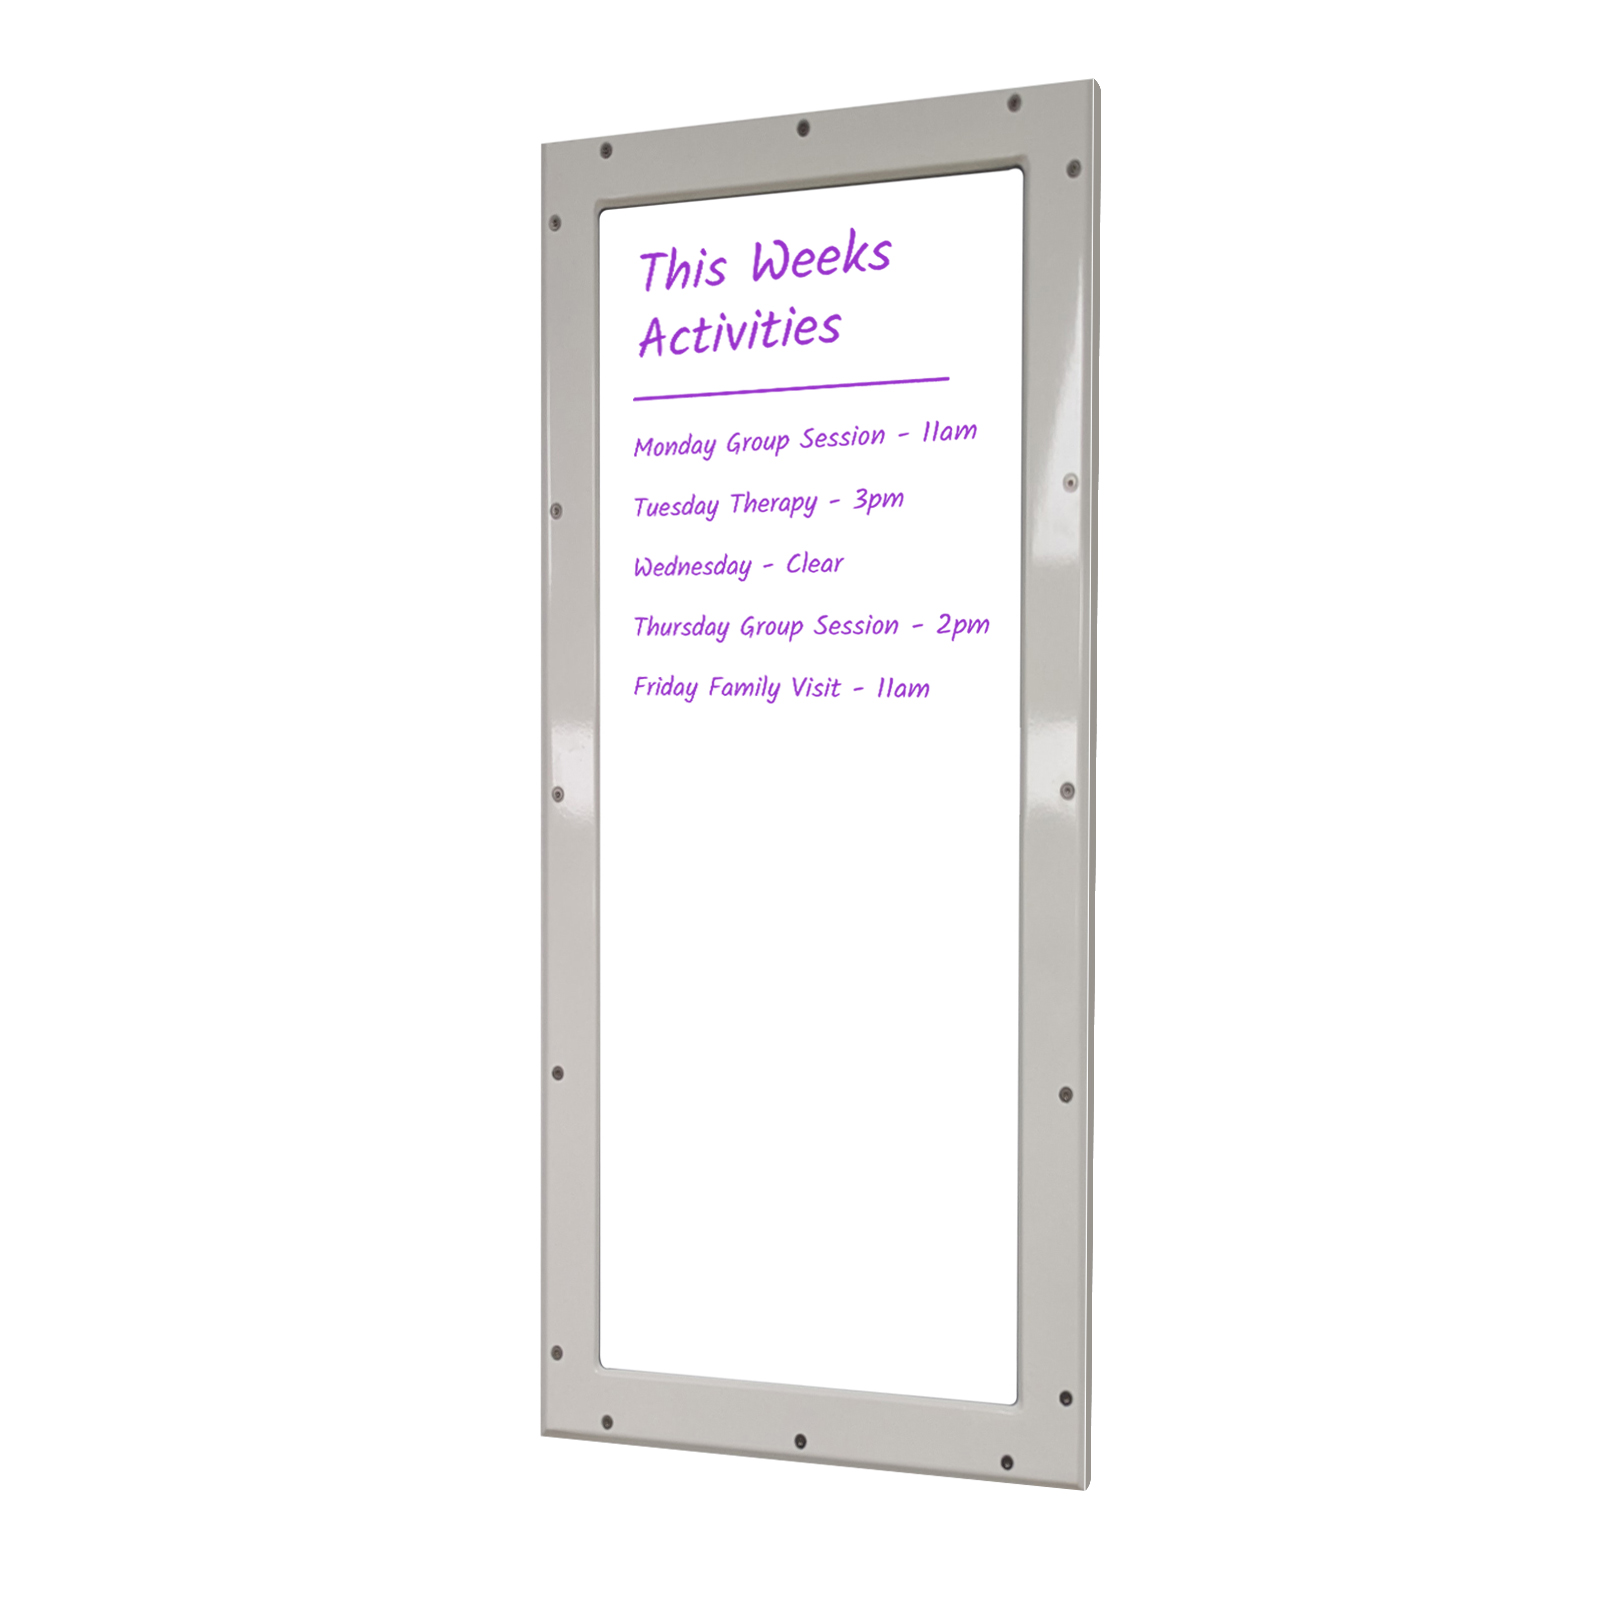 Ligature-Resistant and shatter-proof whiteboard for behavioral health - KG235 by Kingsway Group USA.